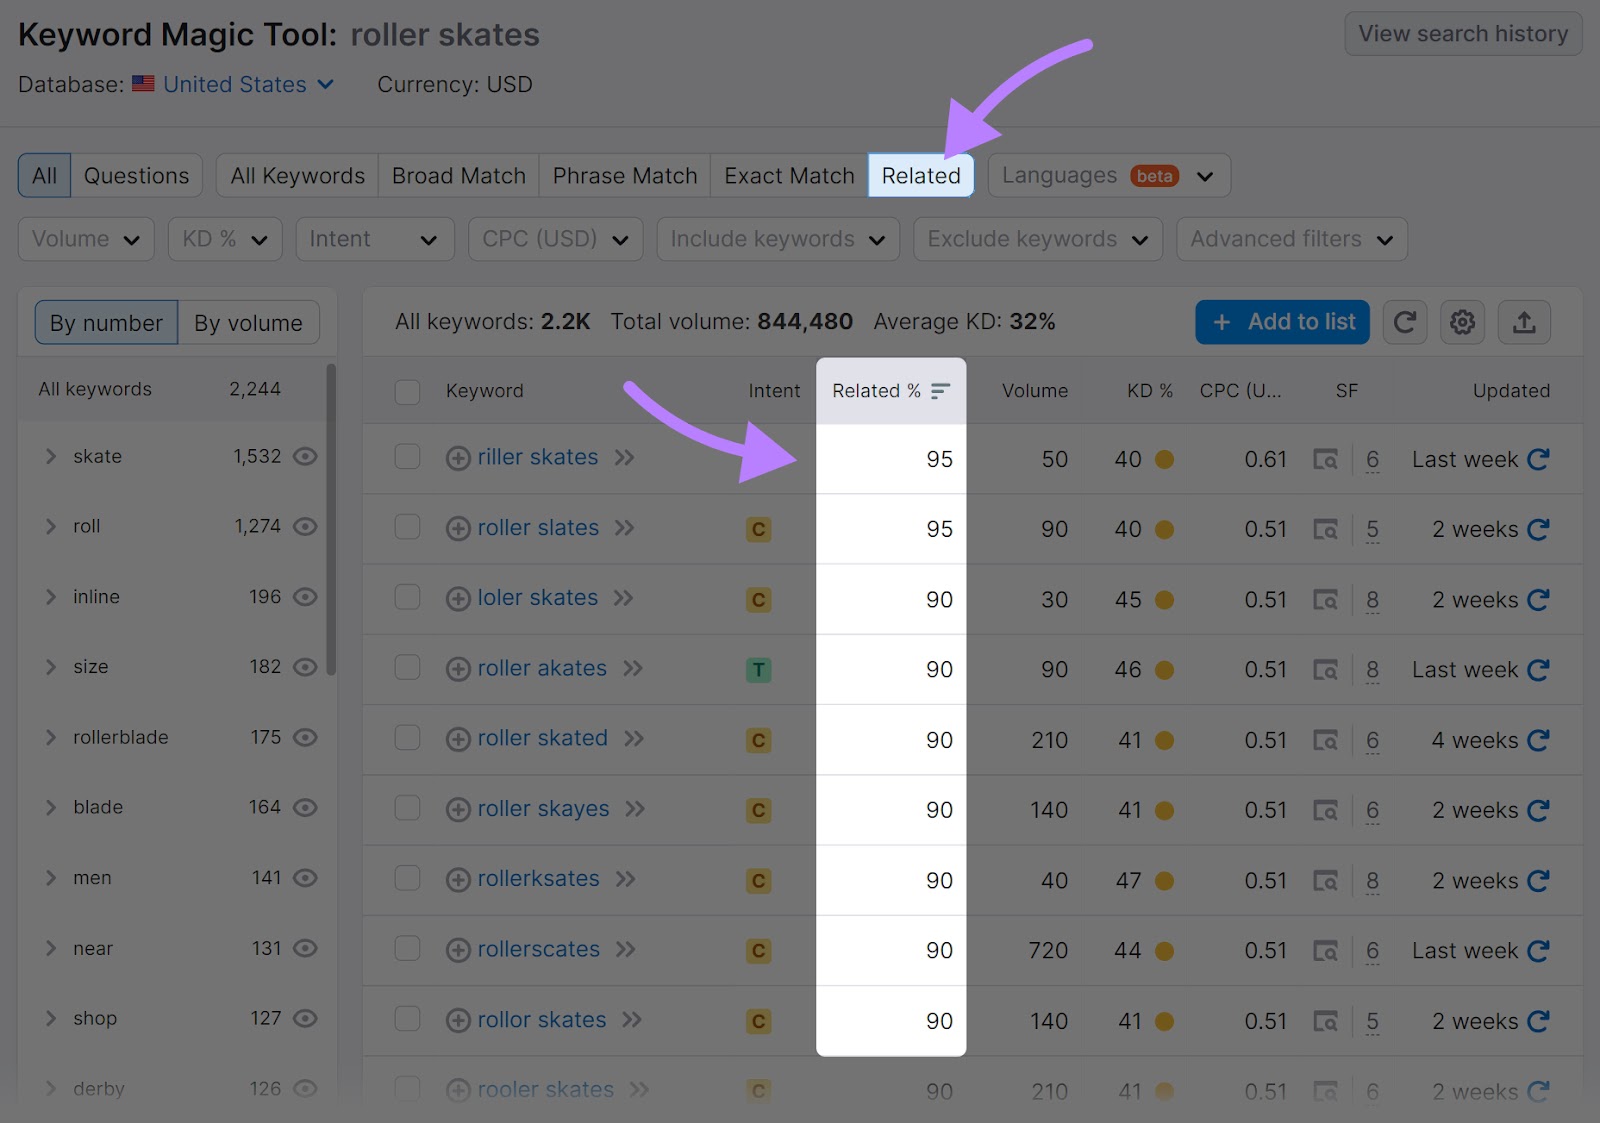 Keyword Magic Tool array  with "Related" metric highlighted